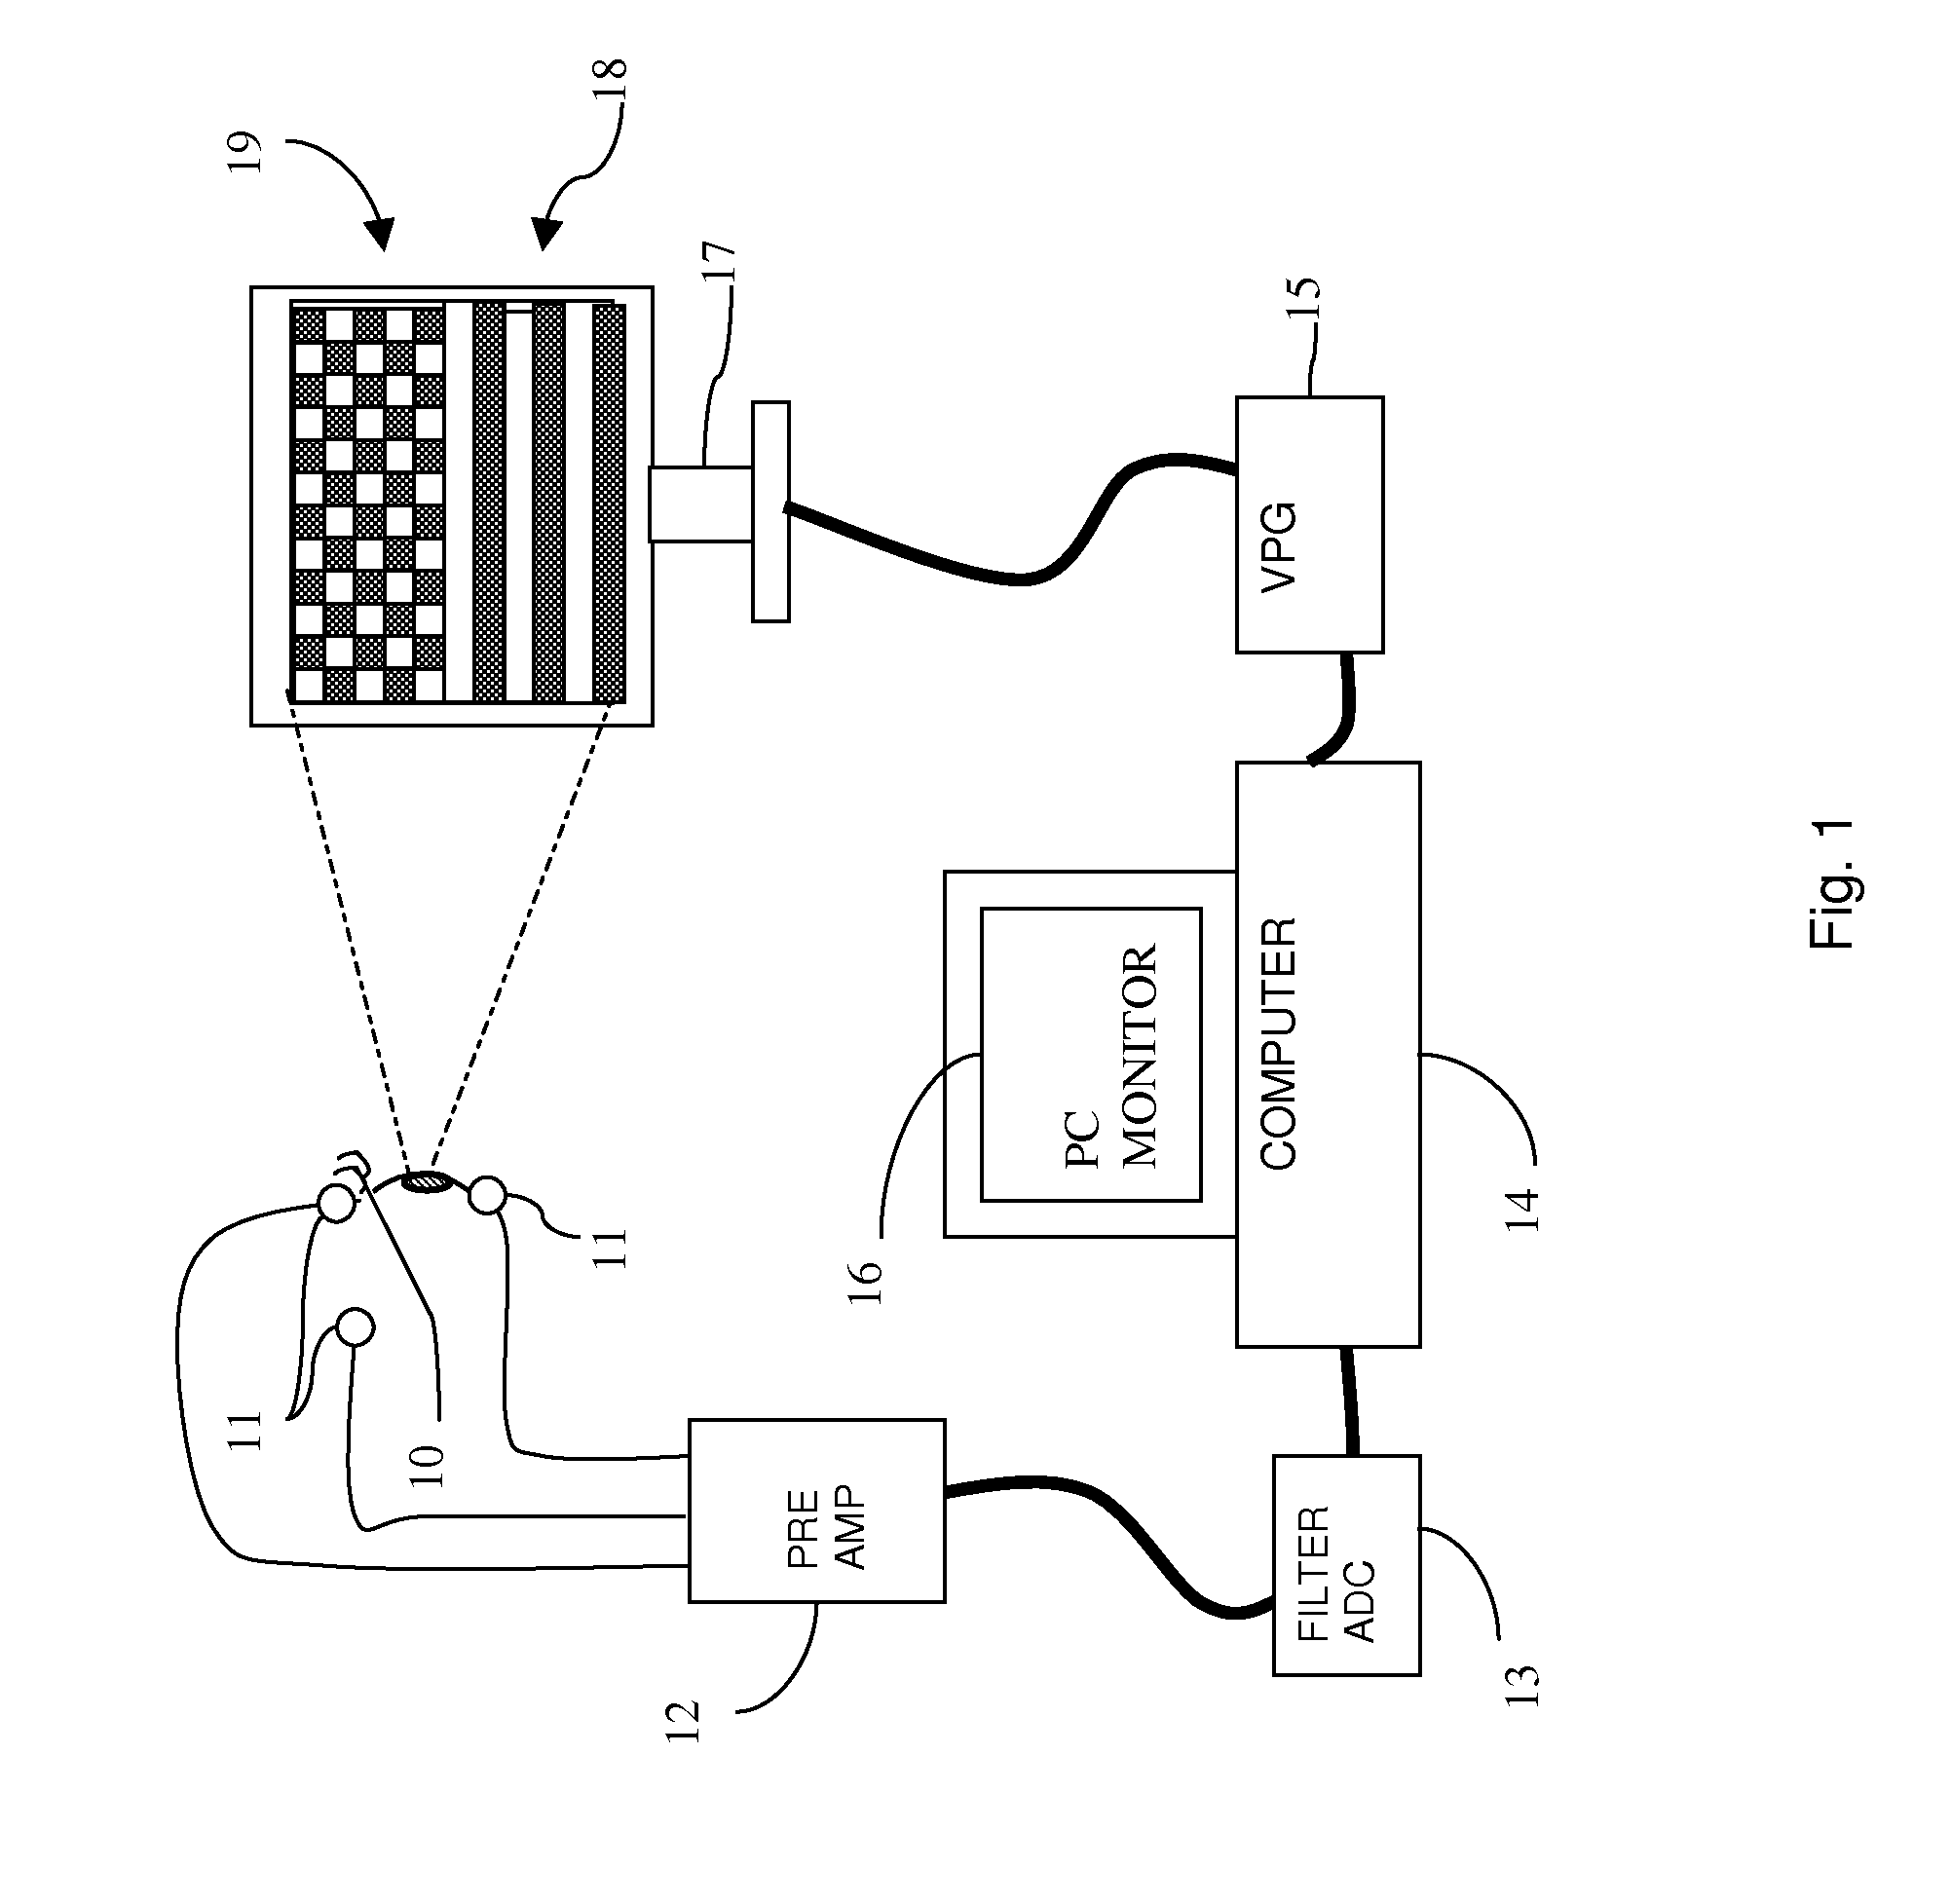 Method and apparatus for visual stimulation and recording of the pattern electroretinogram of the visual evoked potentials